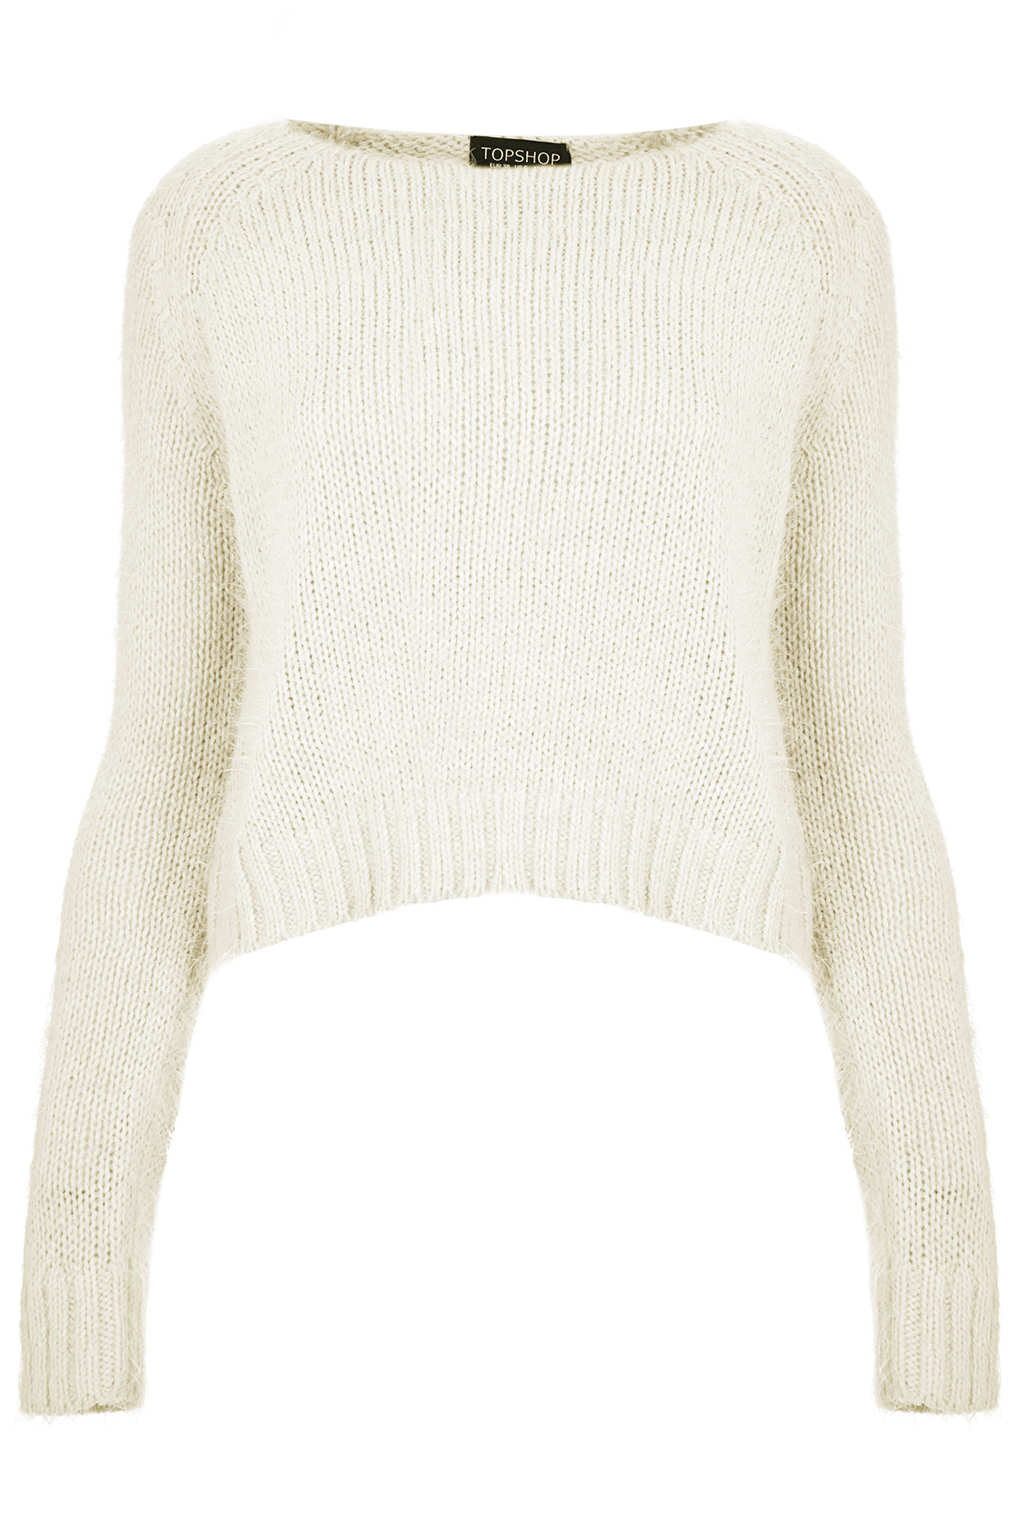 TOPSHOP Knitted Fluffy Crop Jumper in Natural - Lyst